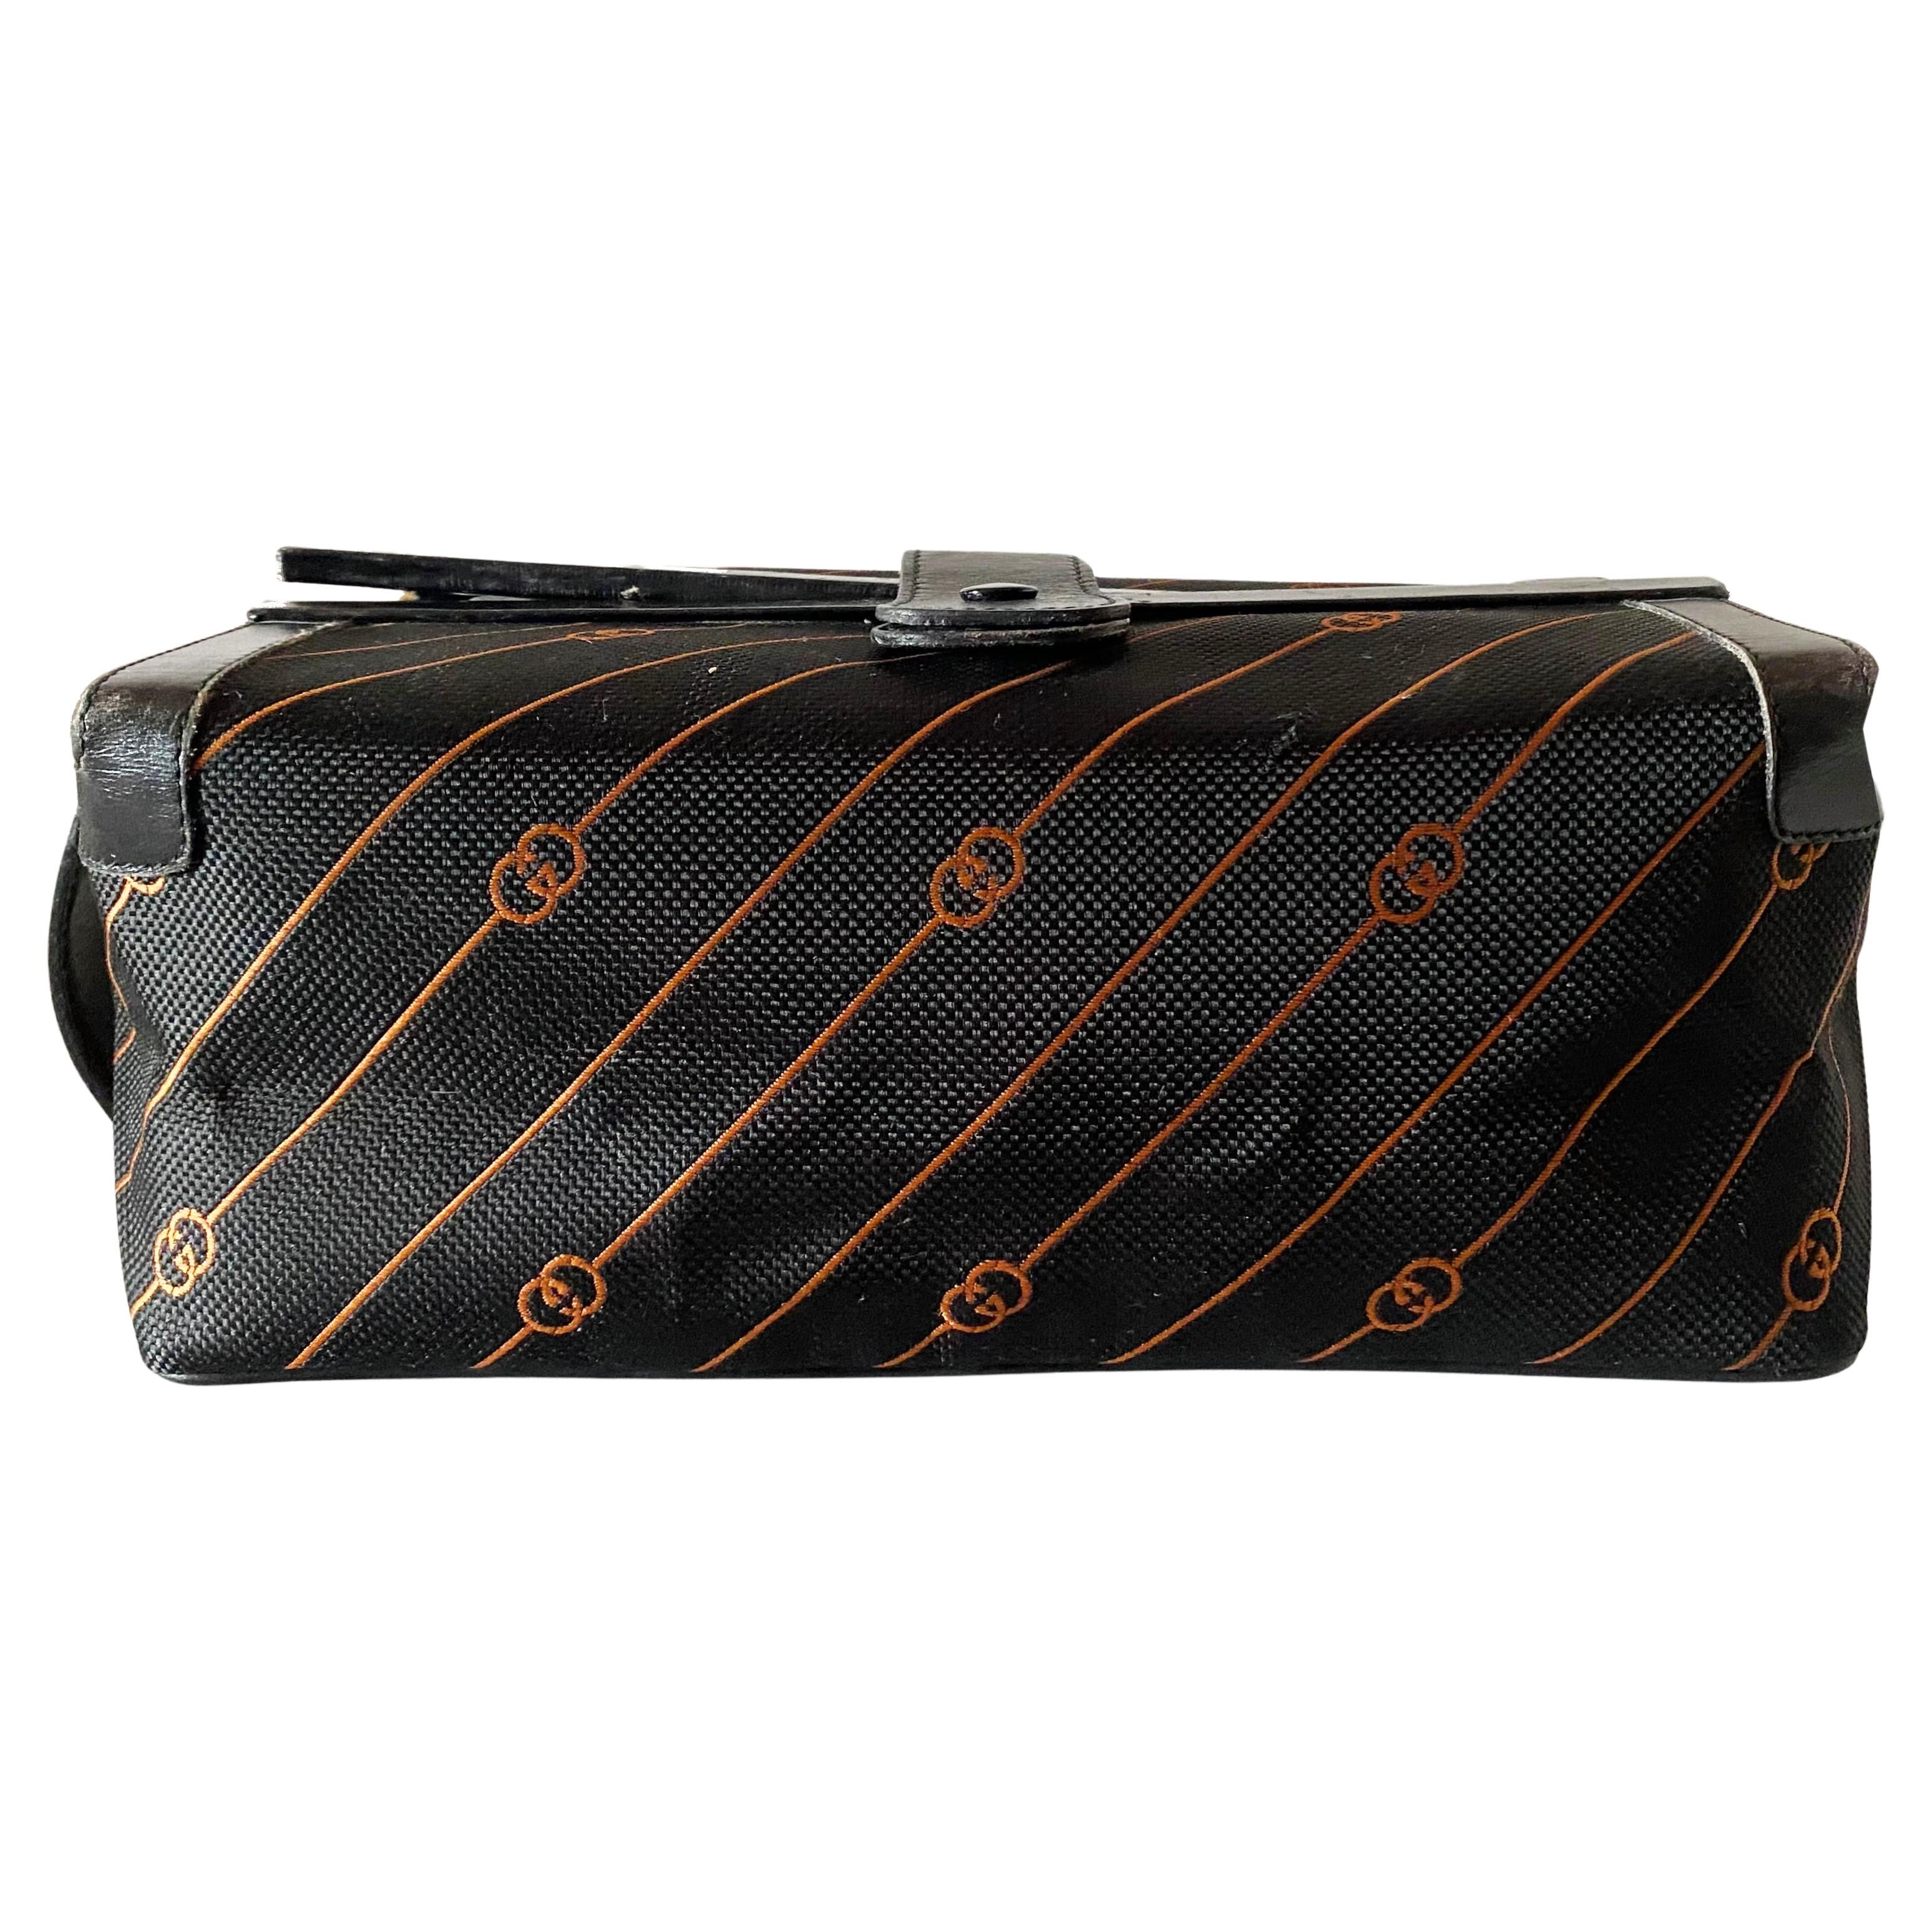 The Vintage Gucci GG Monogram Leather Wash Bag is Made in Italy, this unisex item features black canvas and leather exterior material with the iconic Gucci GG pattern, side leather handle strap 

Condition: vintage, 1980s, it shows some wear inside